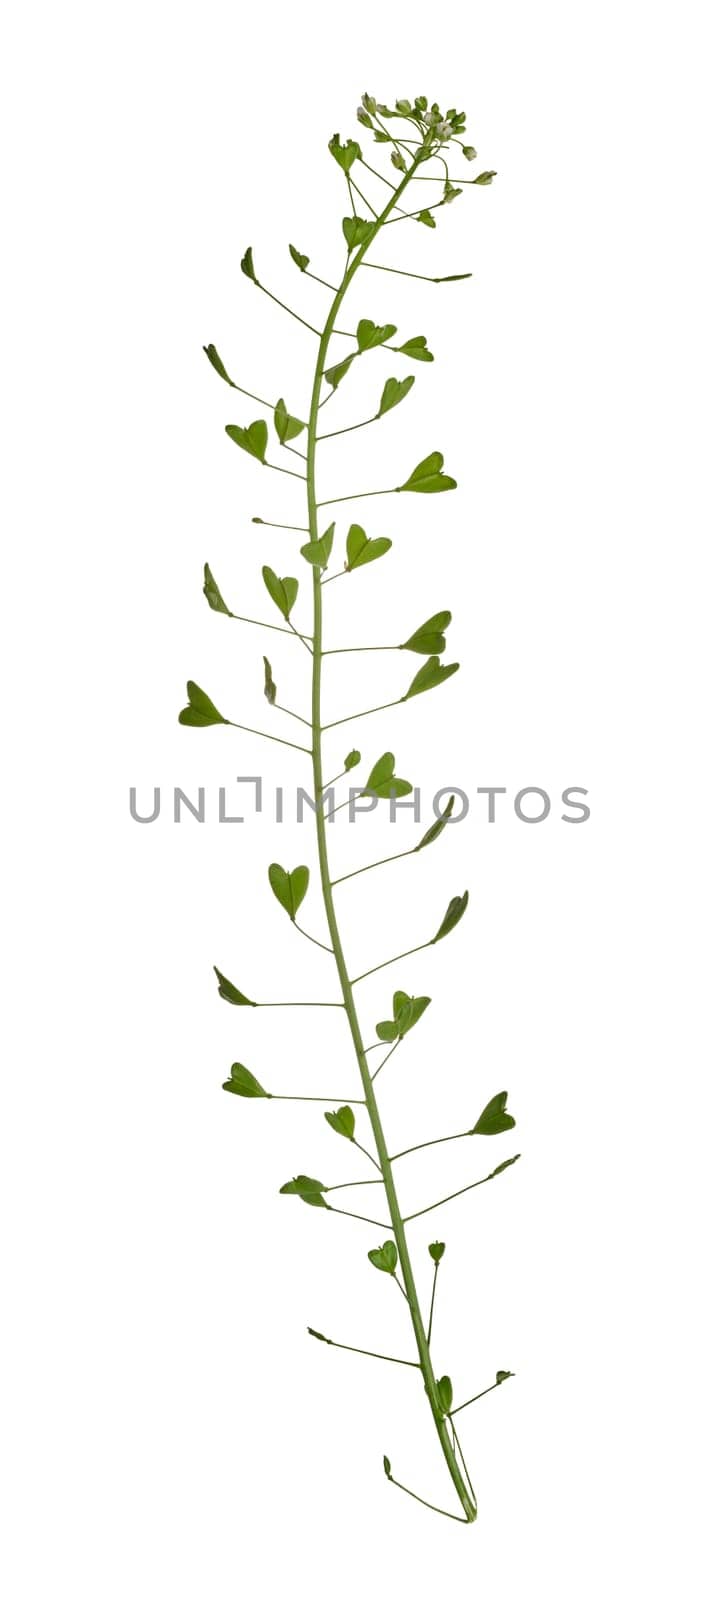 Stem of Capsella plant with white flowers and green leaves on isolated background